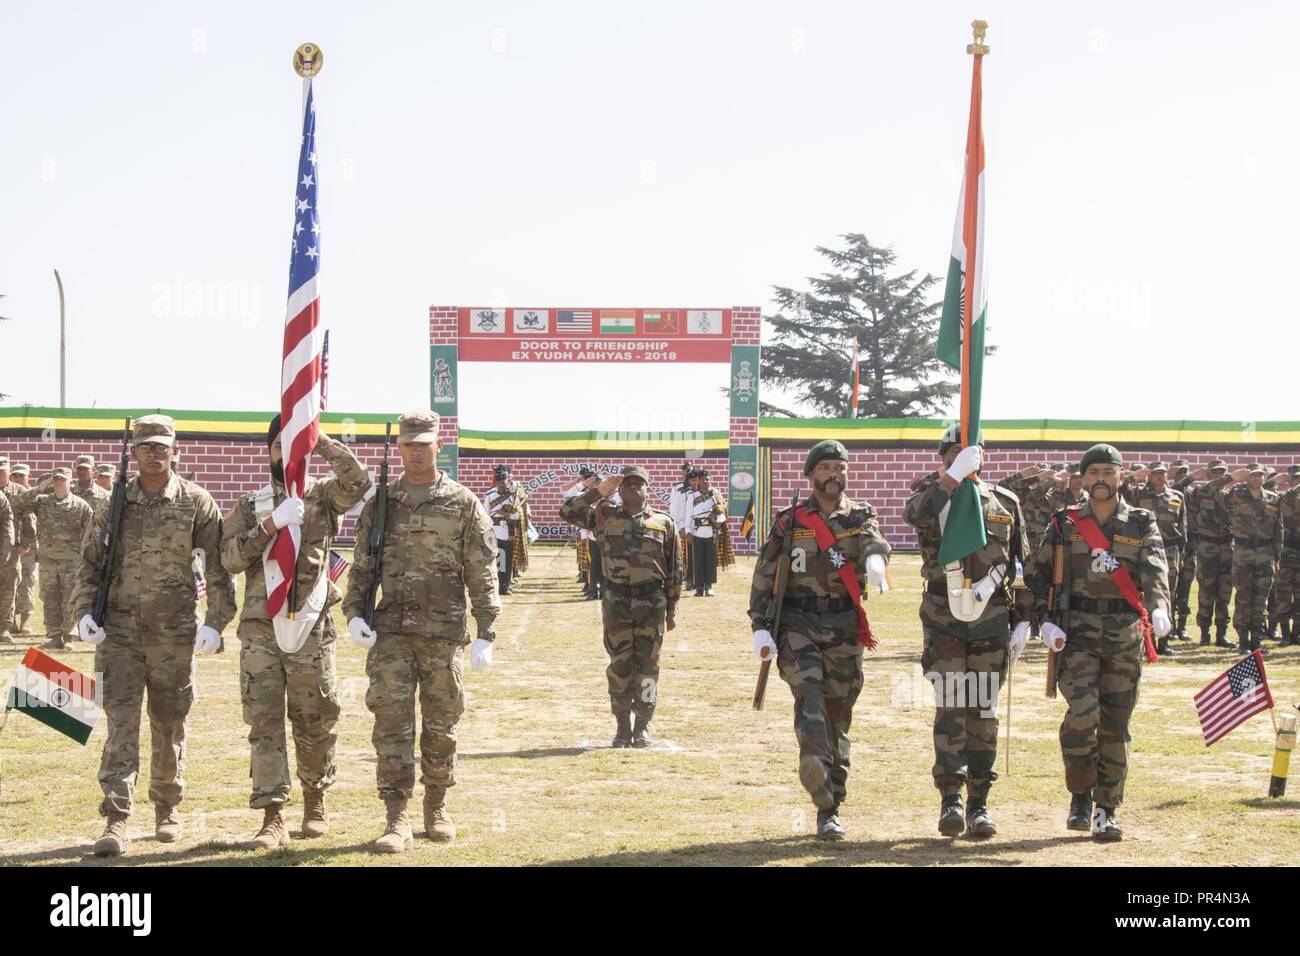 Color guards with the U.S. and Indian armies bear their respective nations’ colors during the Yudh Abhyas opening ceremony at Chaubattia Military Station in Ranikhet, India, Sept. 16, 2018. The bilateral exercise is geared toward enhancing cooperation and coordination between the two nations’ armies through training and cultural exchanges. Stock Photo